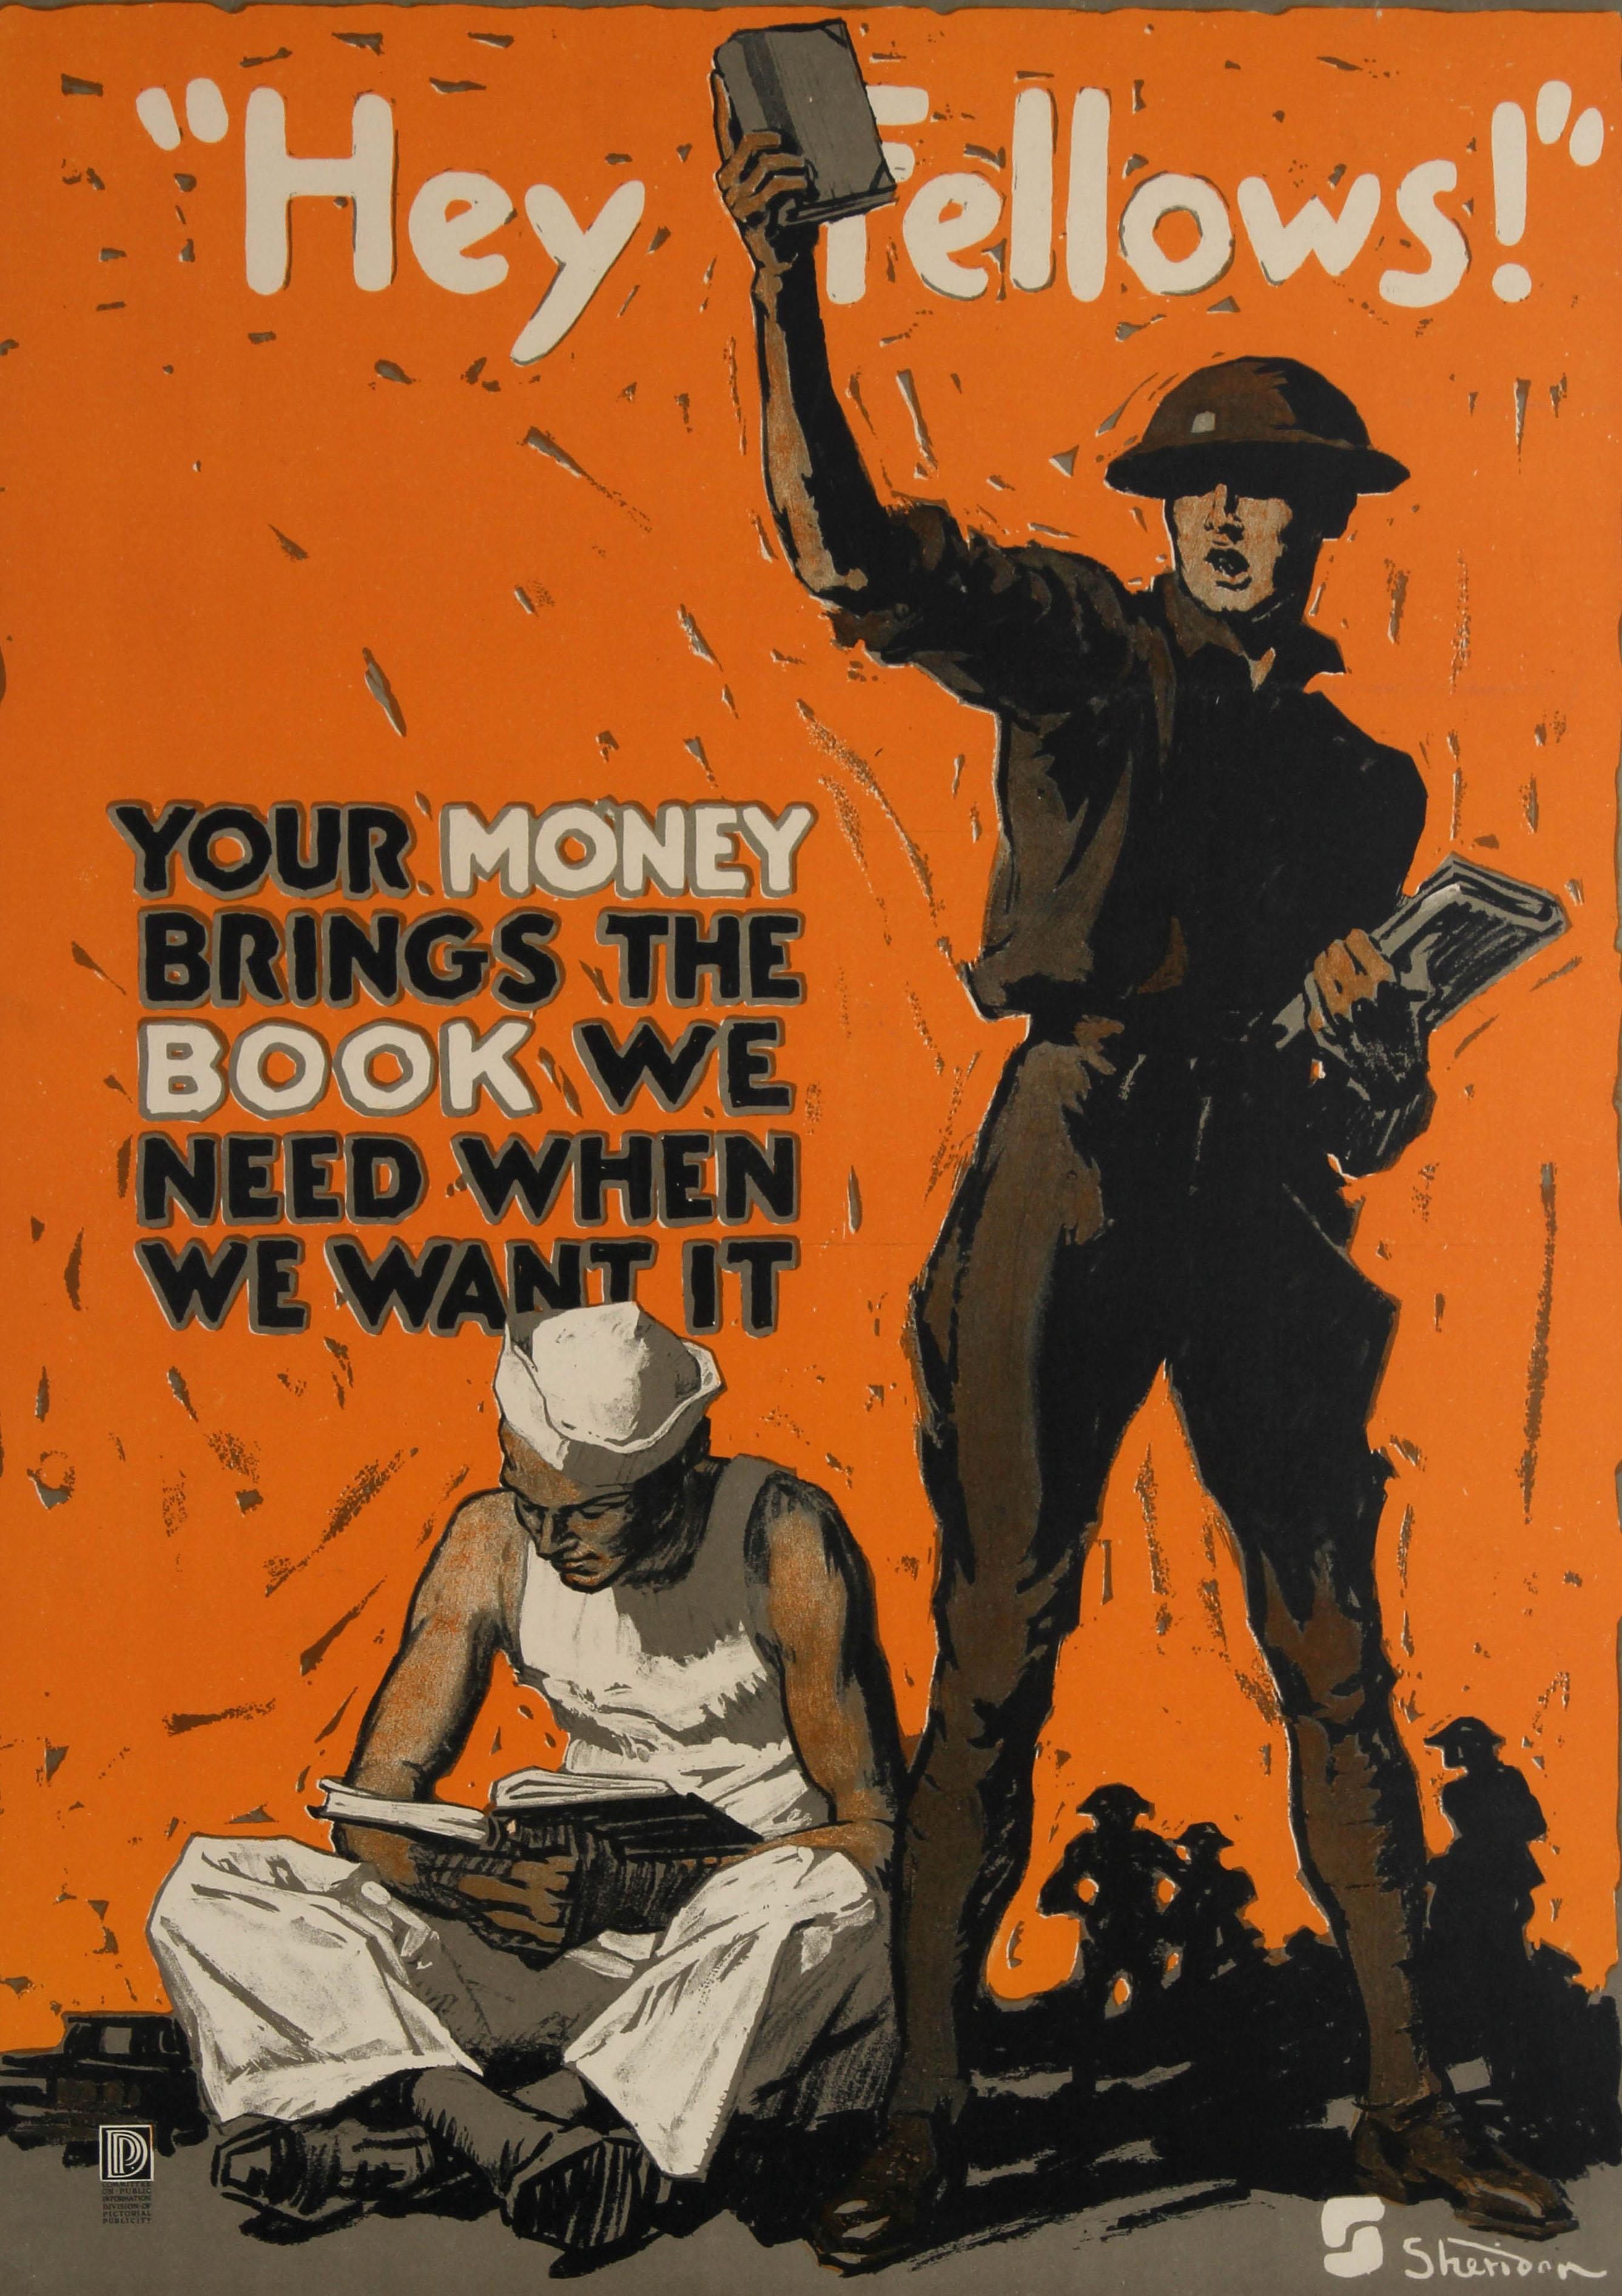 Original vintage World War One poster: Hey fellows! Your money brings the book we need when we want it. American Library Association - United War Work Campaign - Week of November 11 1918. Bold and colourful image on a vivid orange background showing